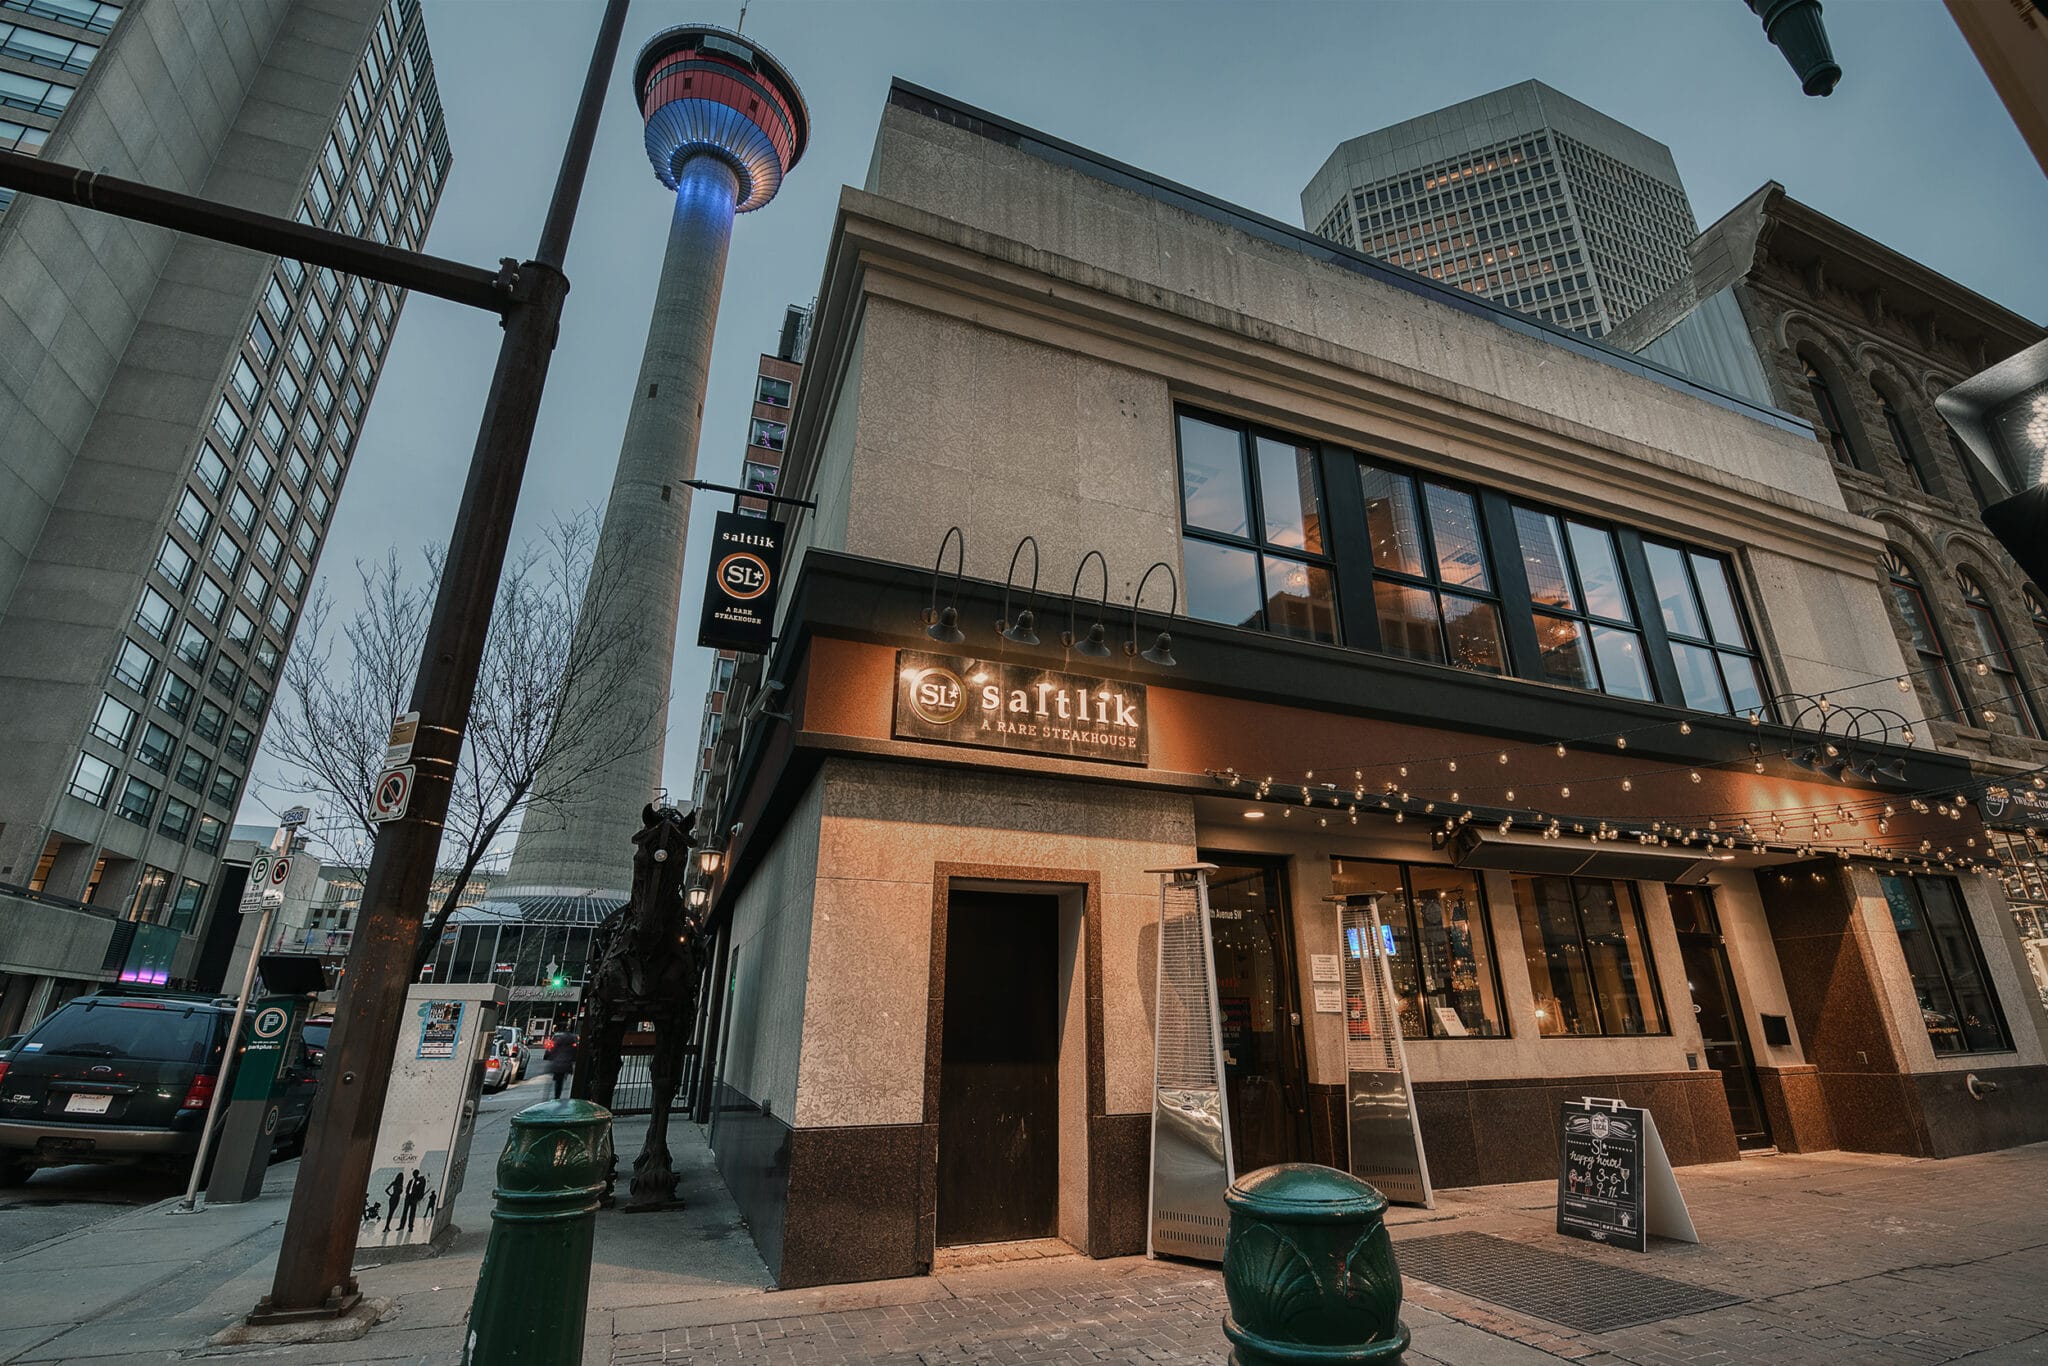 A photograph of the exterior of the Saltlik Restaurant in Calgary with the Calgary Tower visible in the background.